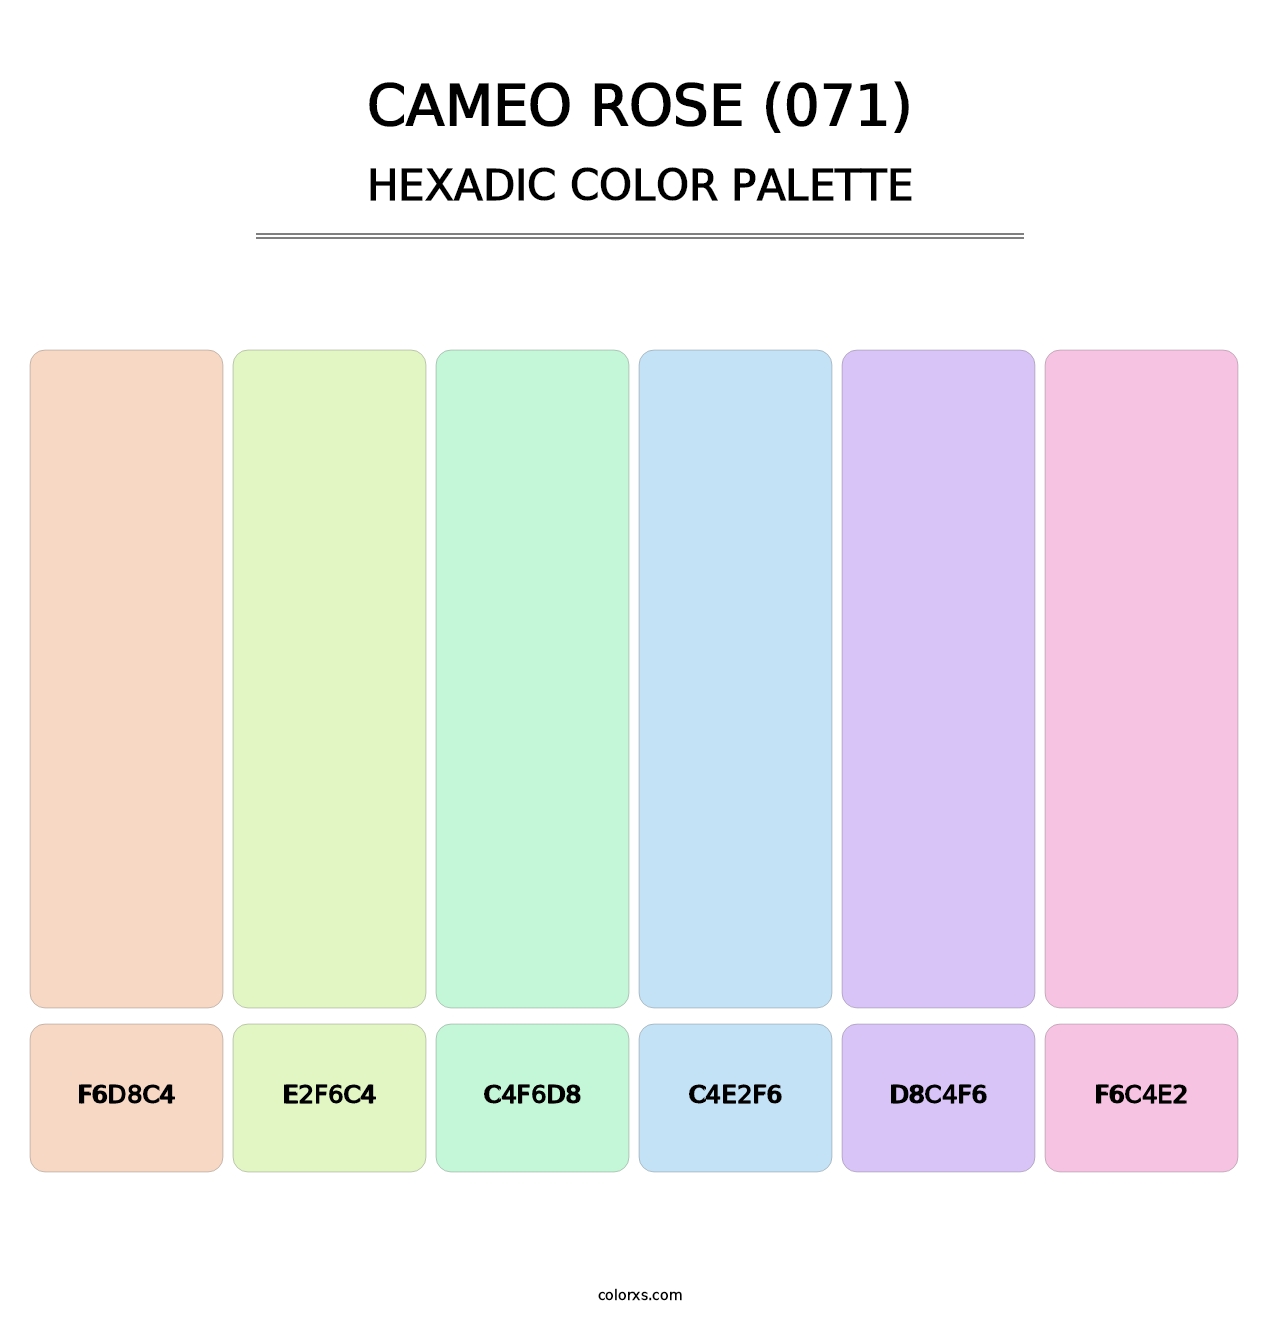 Cameo Rose (071) - Hexadic Color Palette